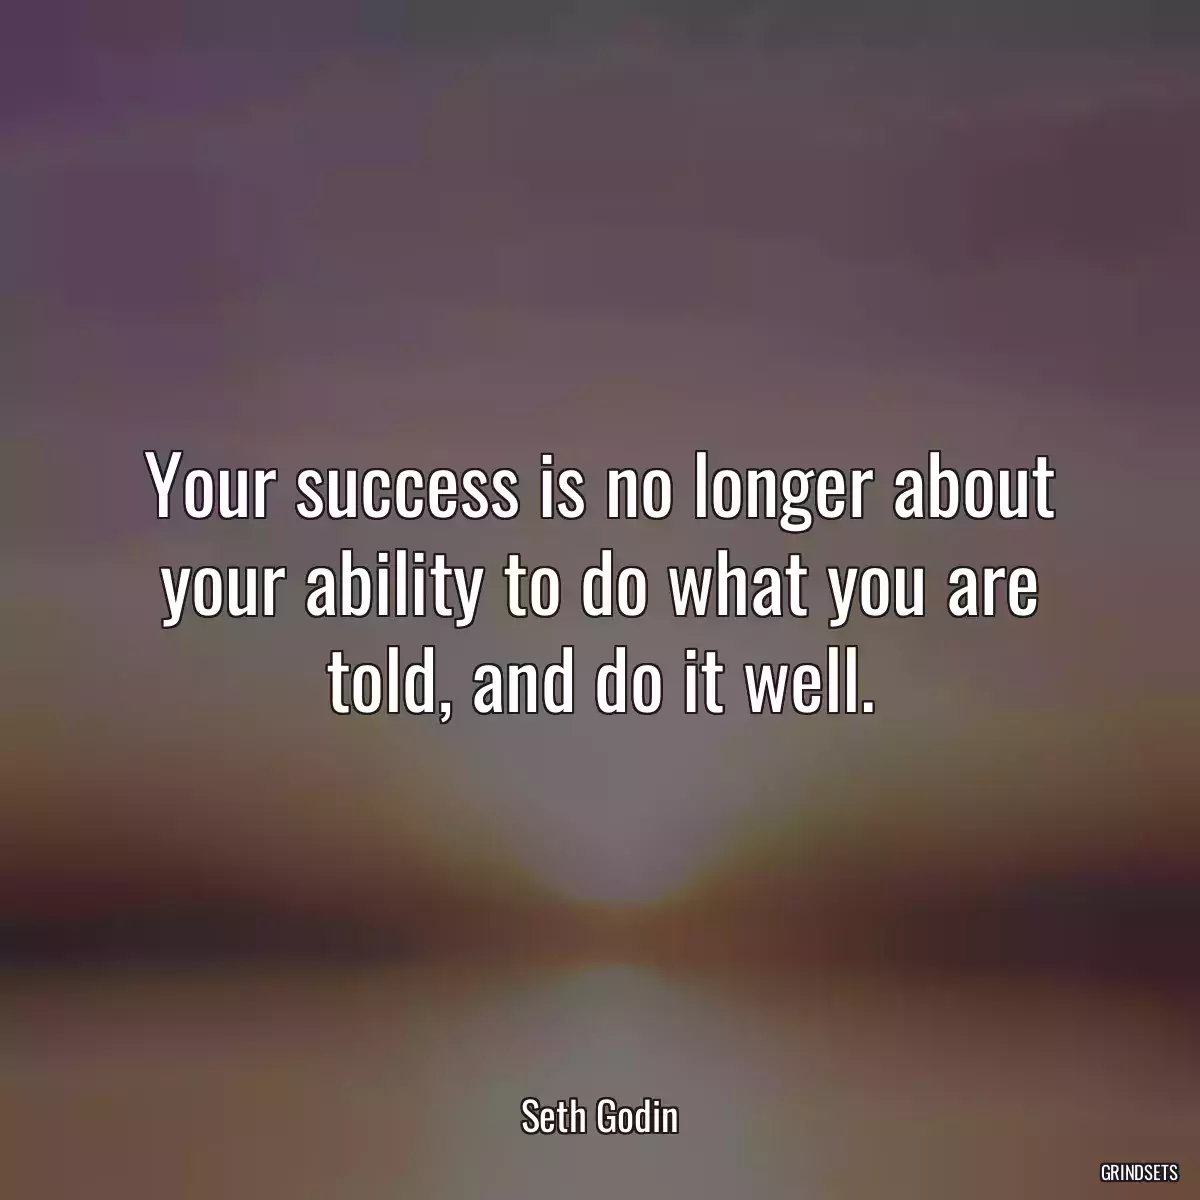 Your success is no longer about your ability to do what you are told, and do it well.